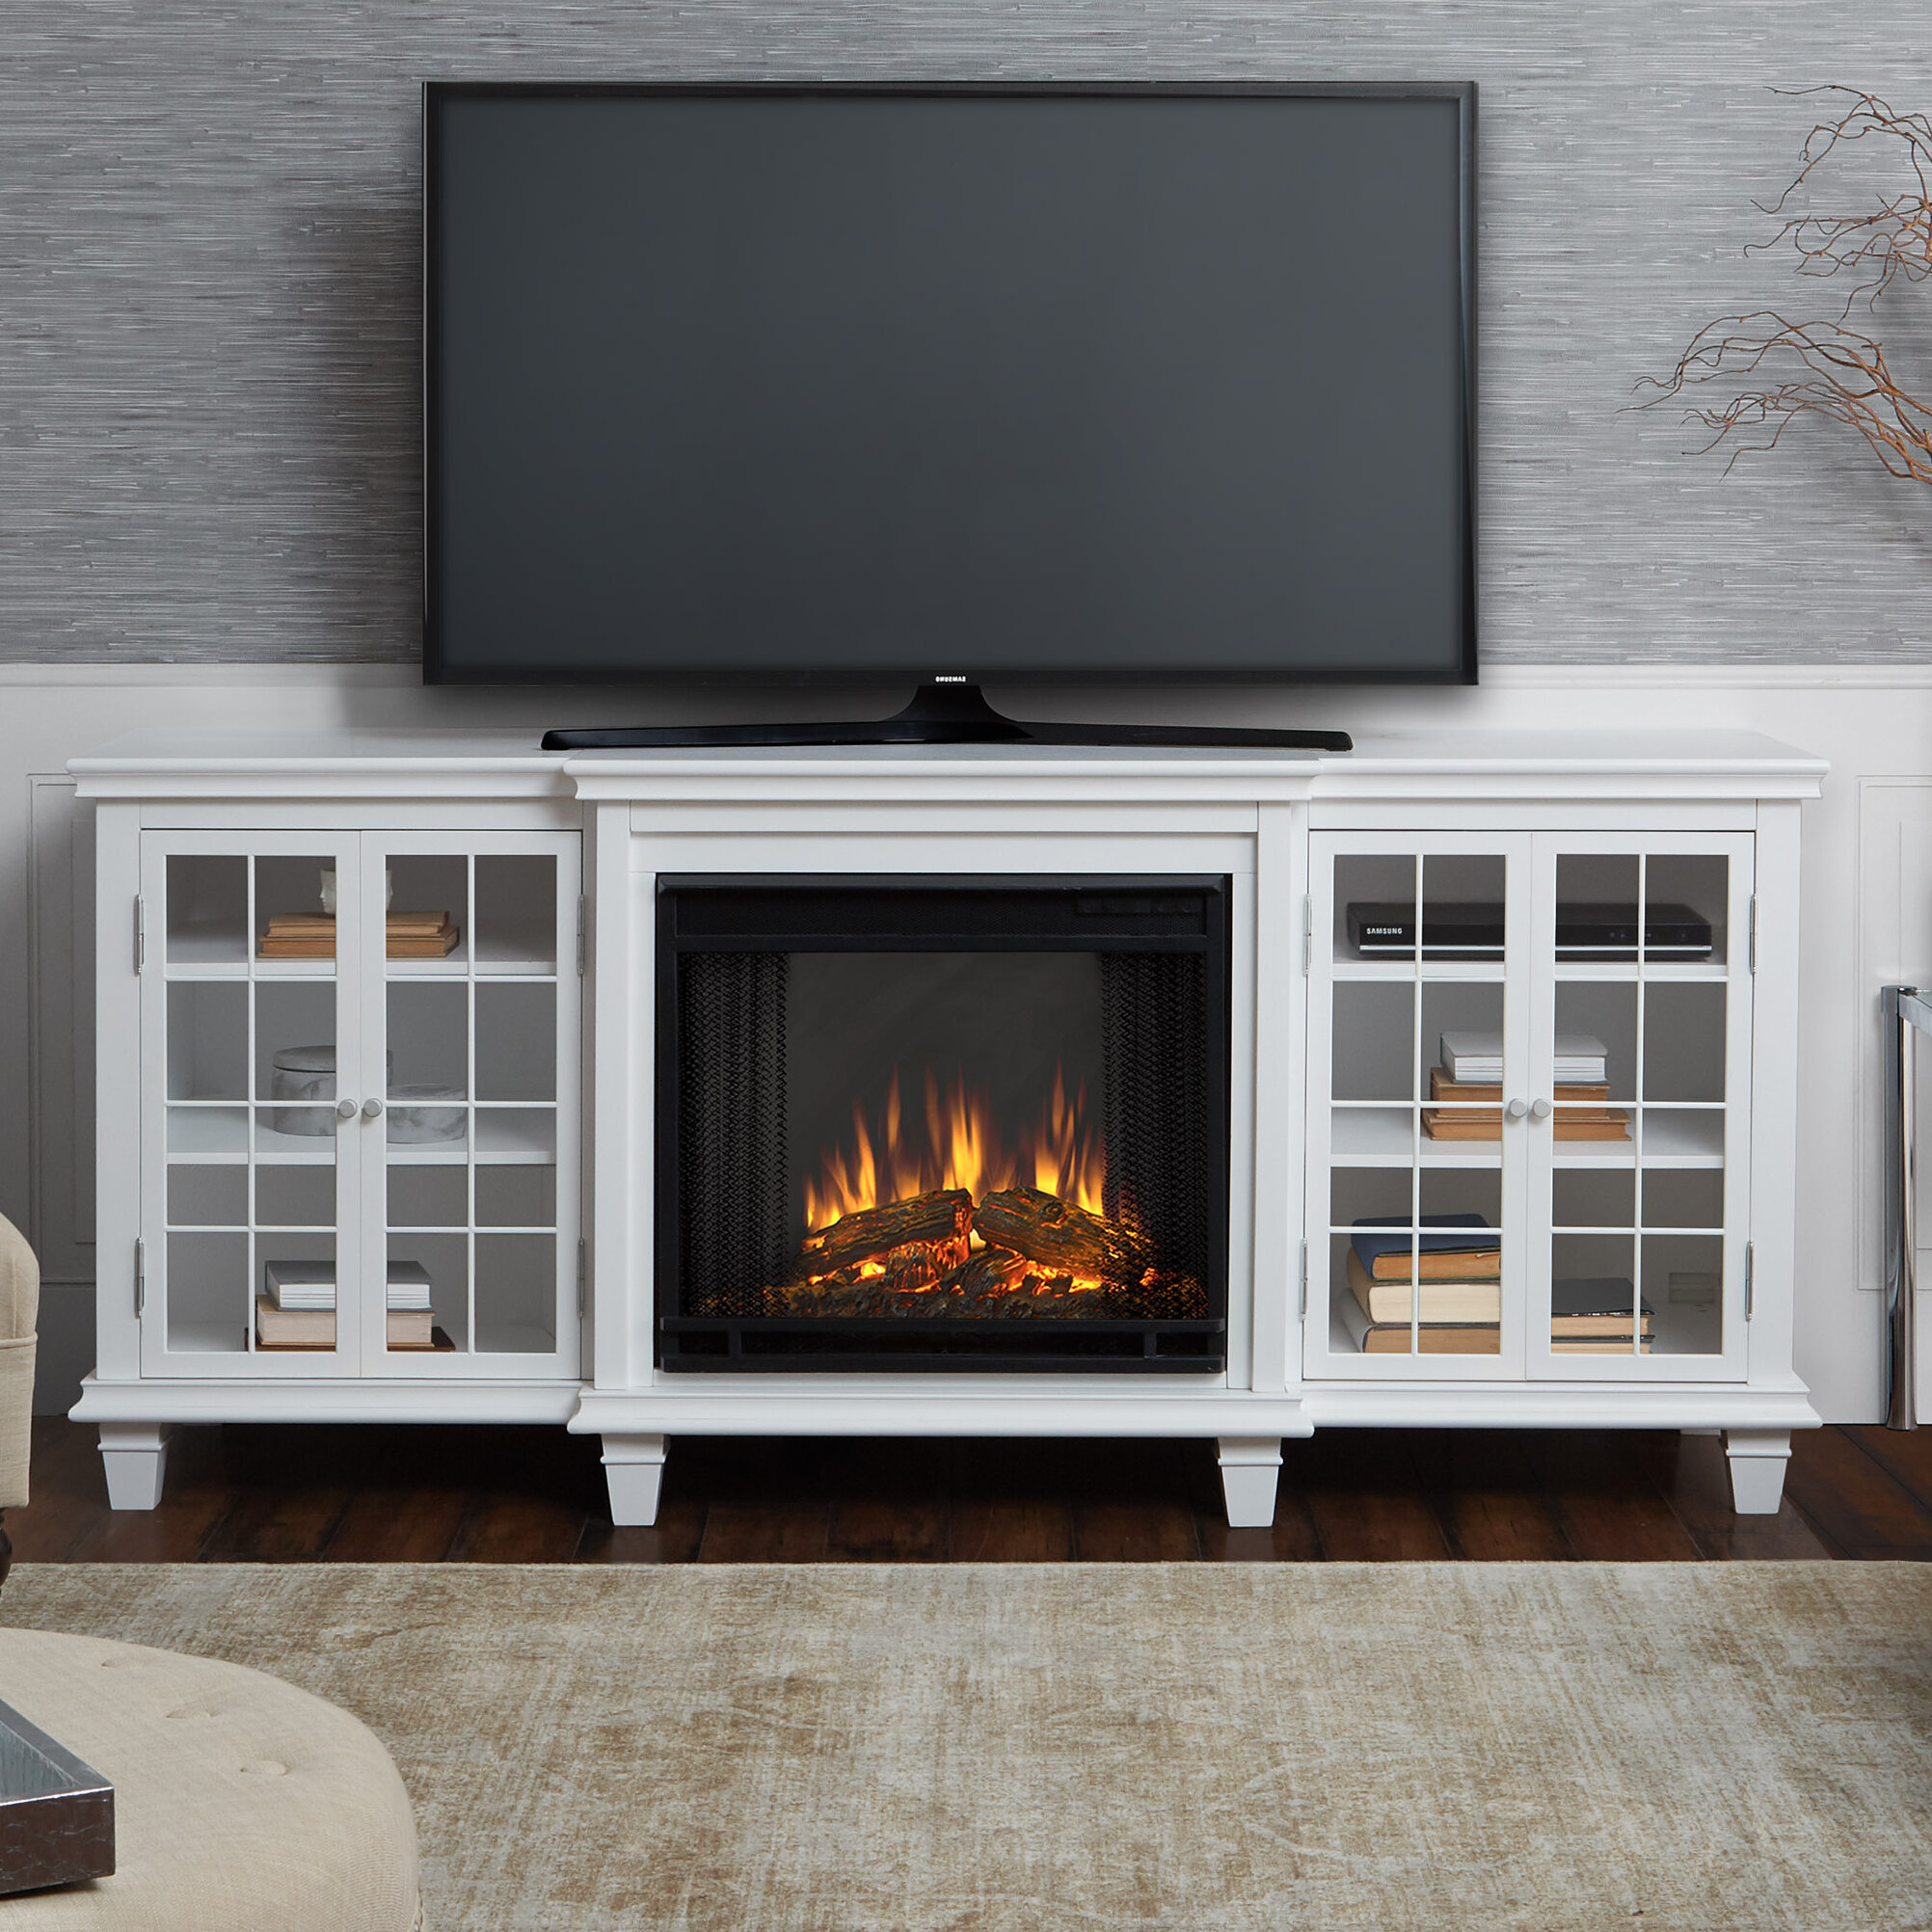 Real Flame Tv Stand For Tvs Up To 78 With Electric Fireplace